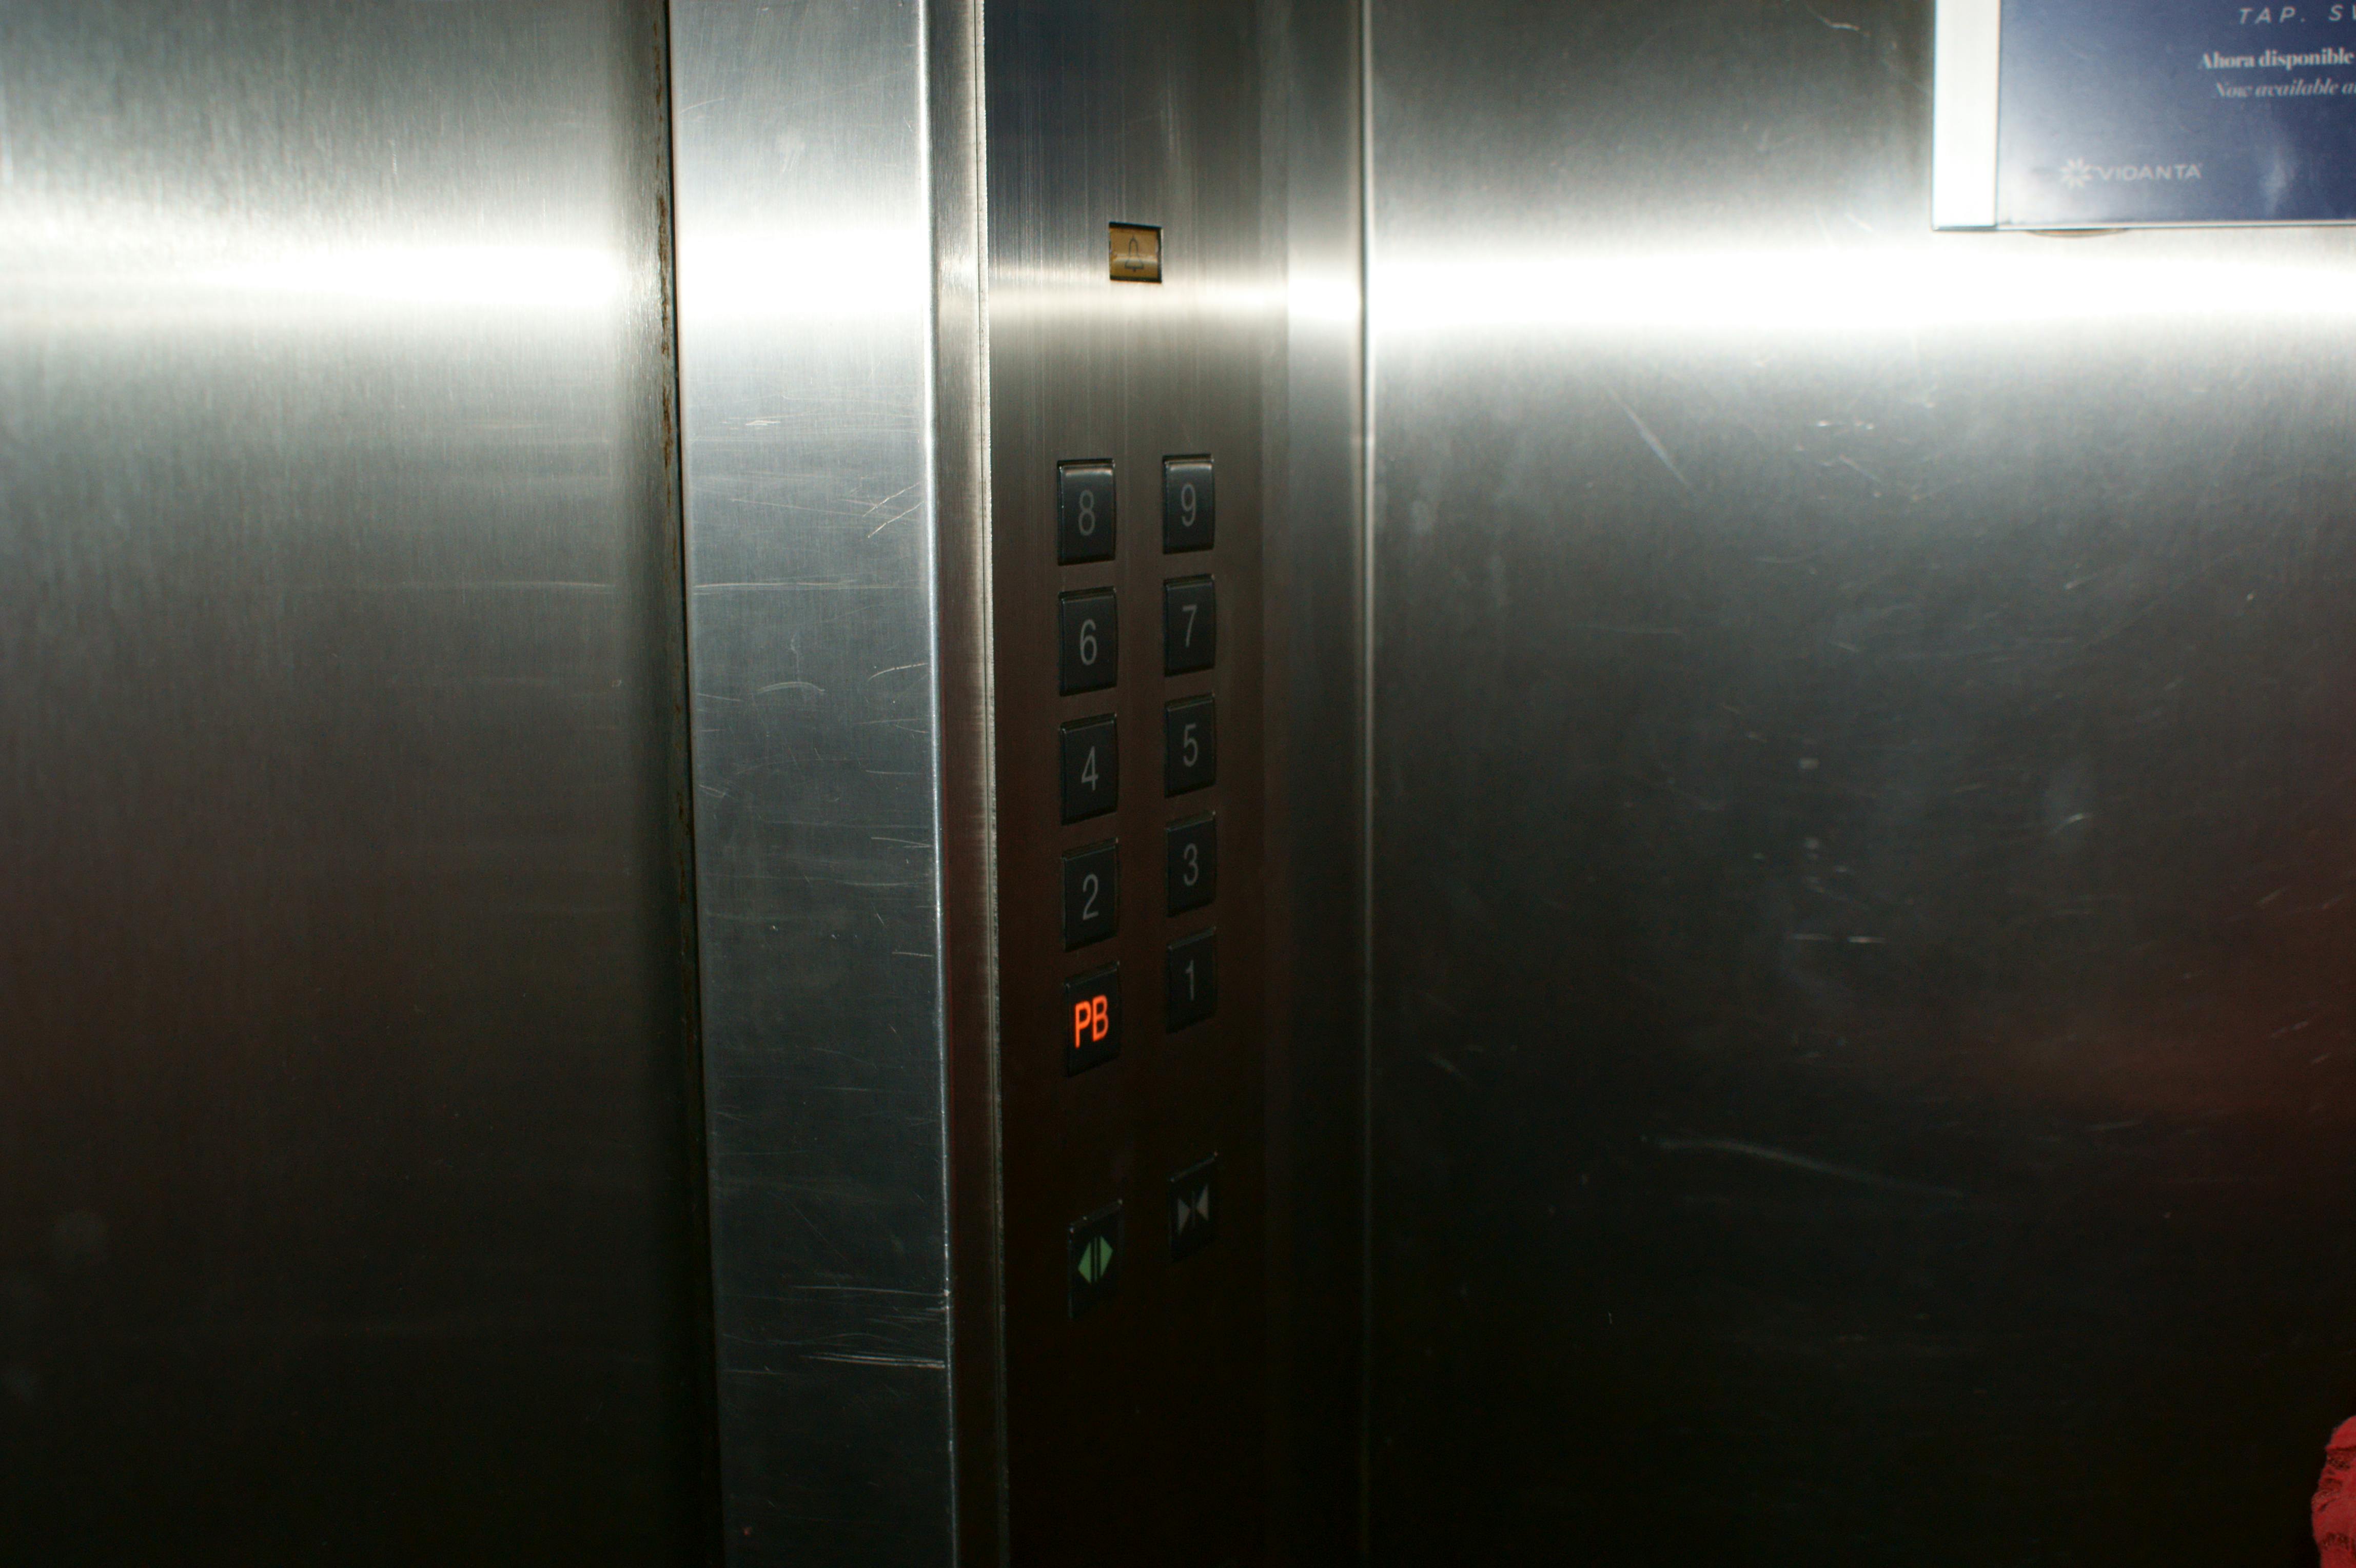 Free stock photo of buttons, elevator, stainless steel